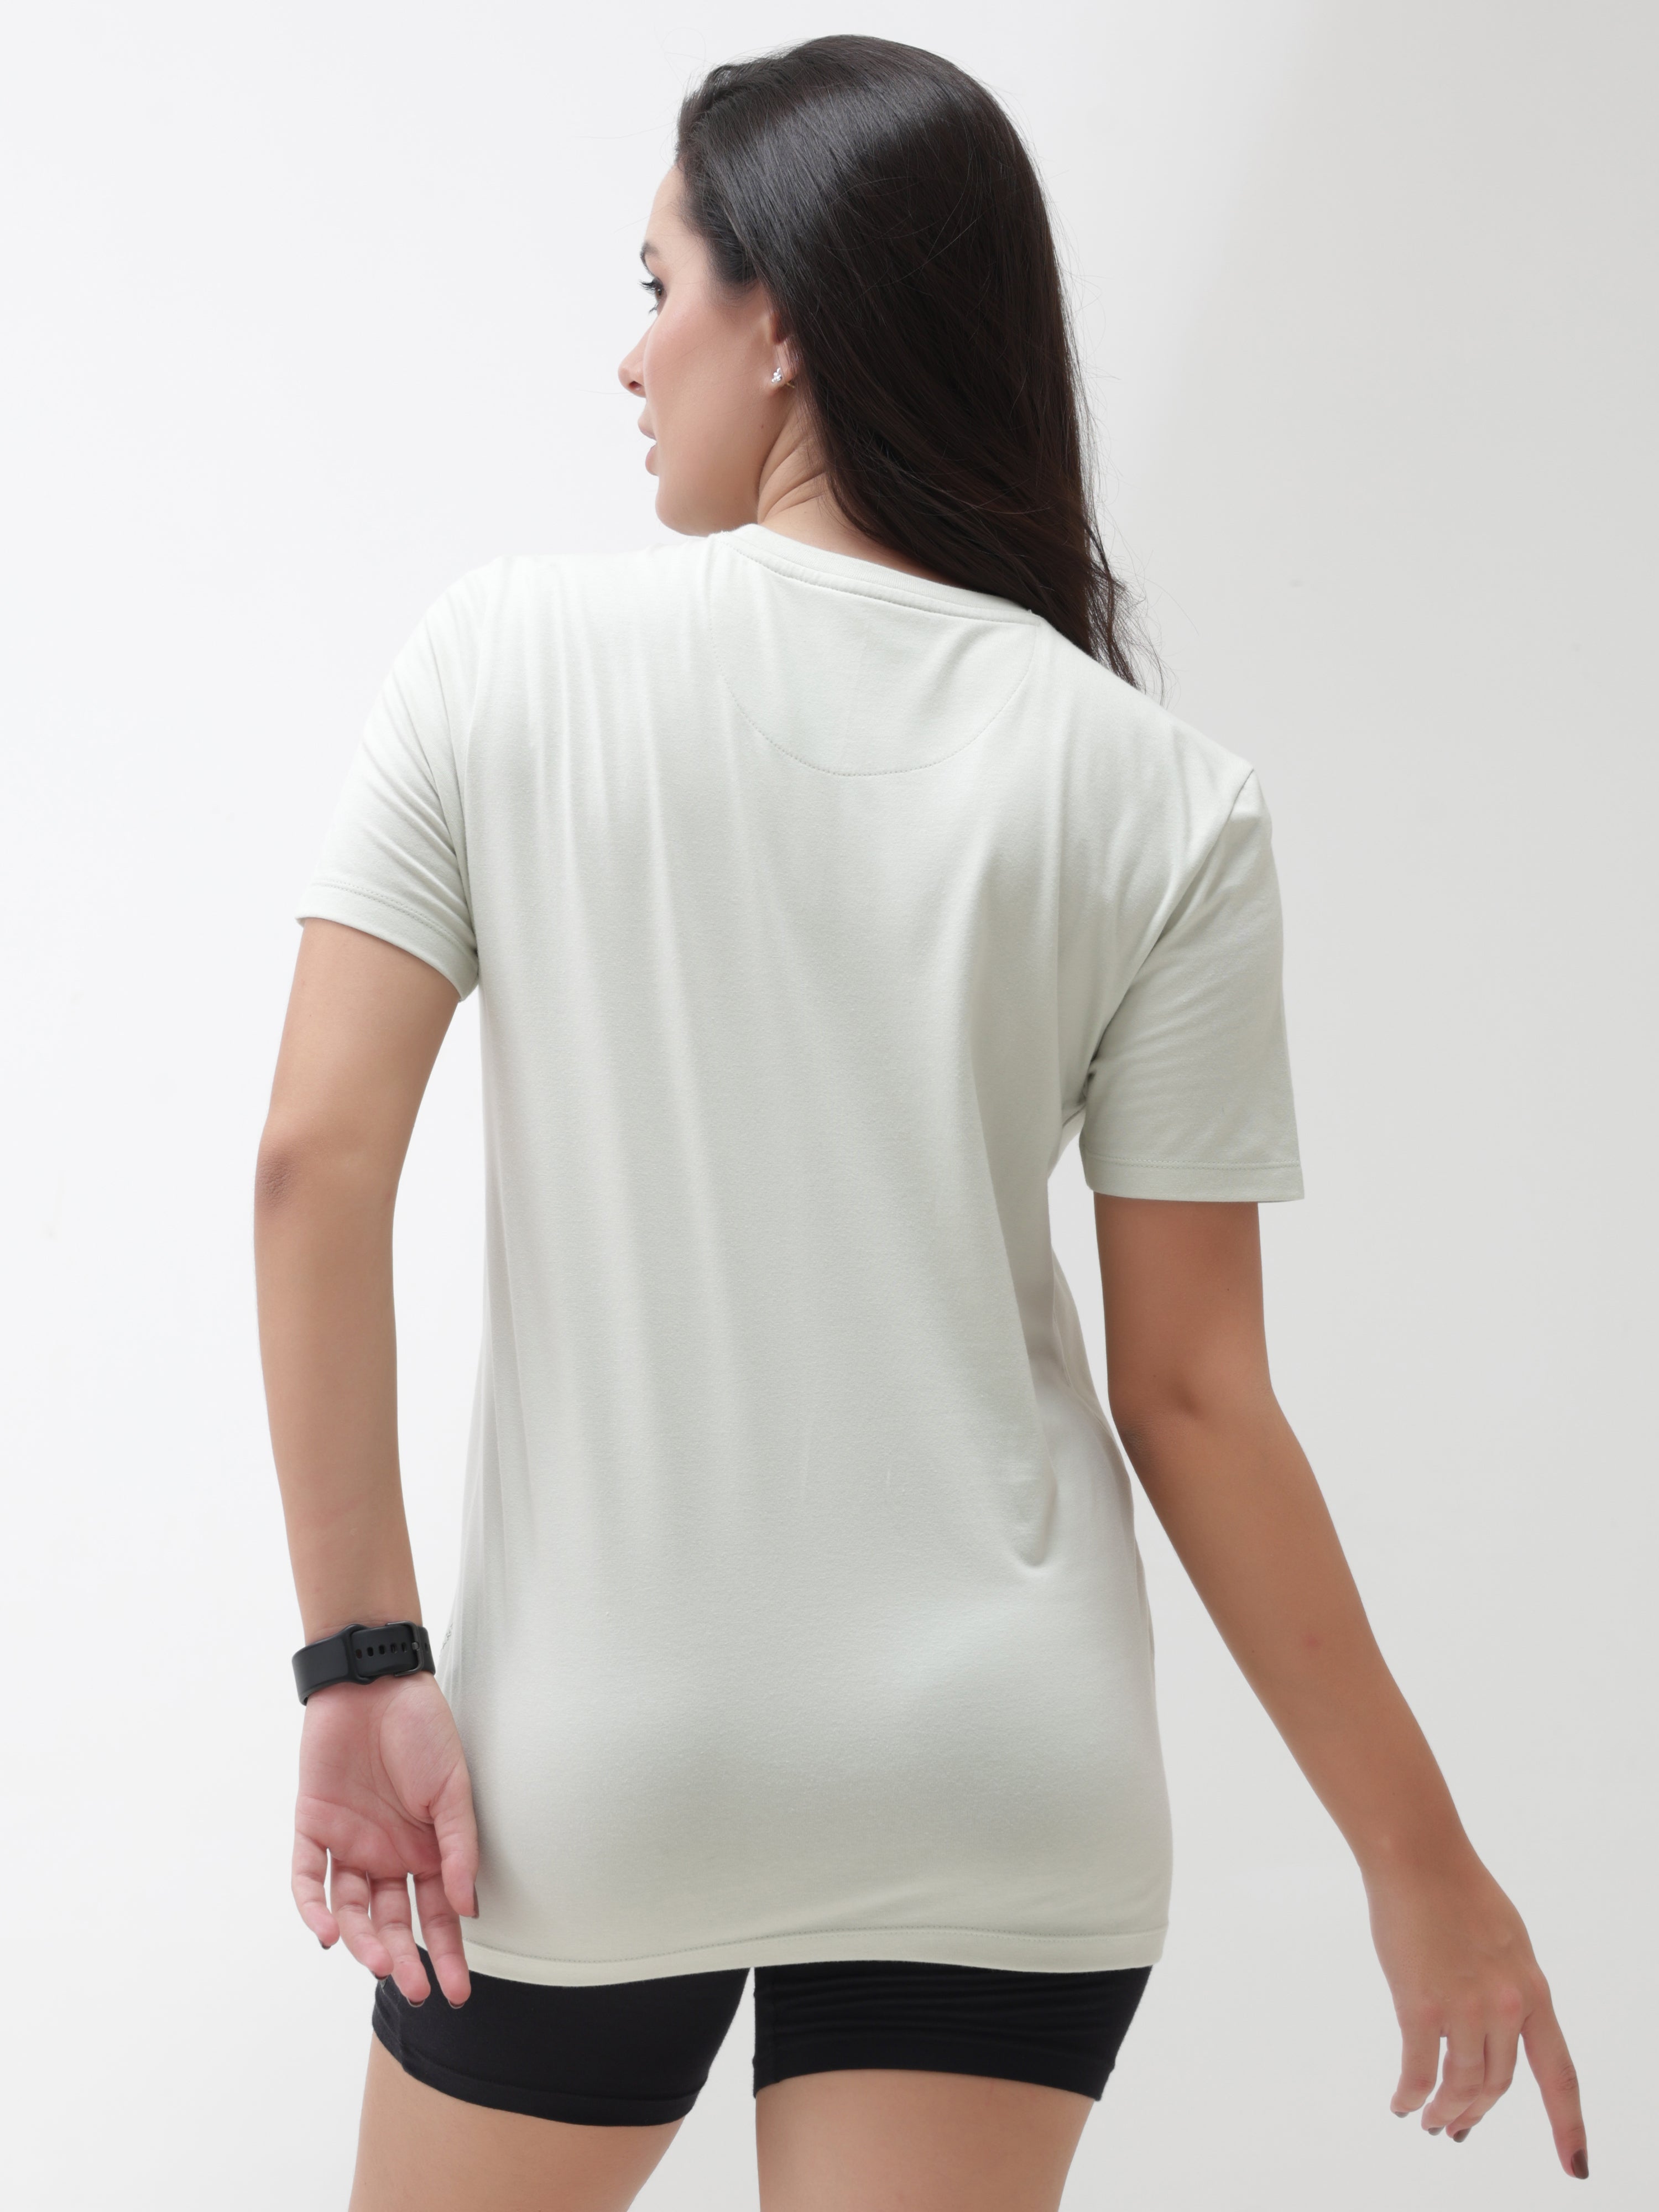 Back view of woman wearing lime enigma anti-stain, anti-odor, stretchable, Turms intelligent apparel T-shirt with tailored fit and round neck.